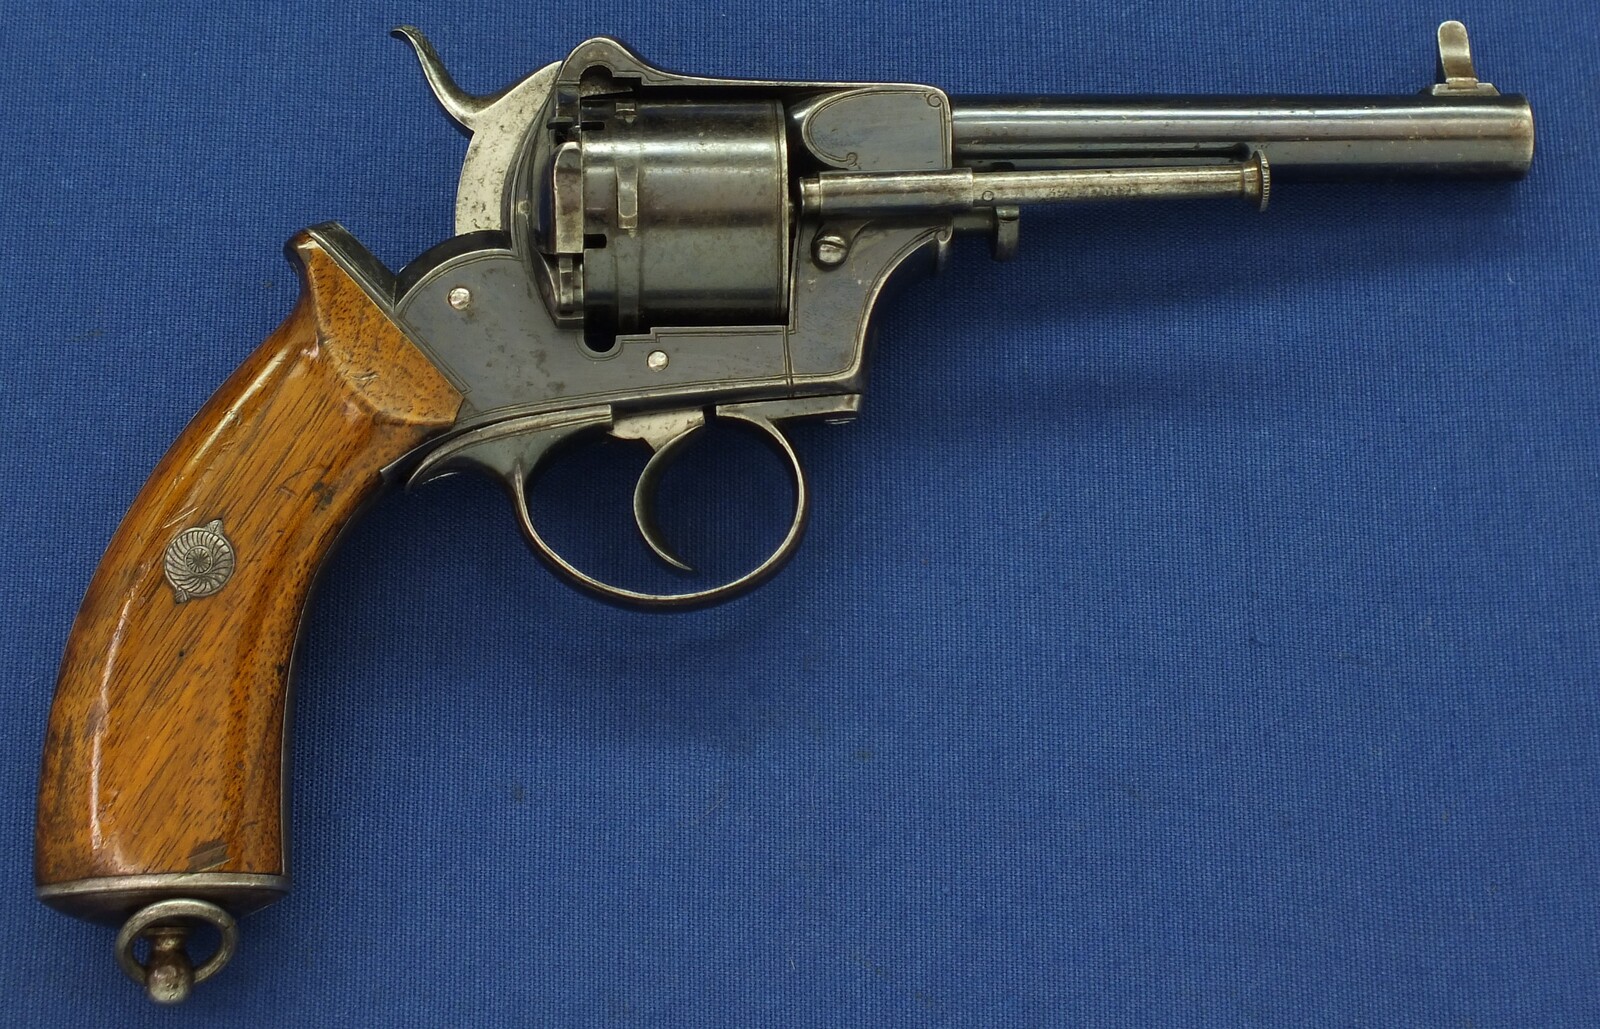 A fine antique German 6 shot single and double action 9mm pinfire Revolver by Valentin Christoph Schilling Suhl. Length 27,5cm. In near mint condition. Price 1.450 euro